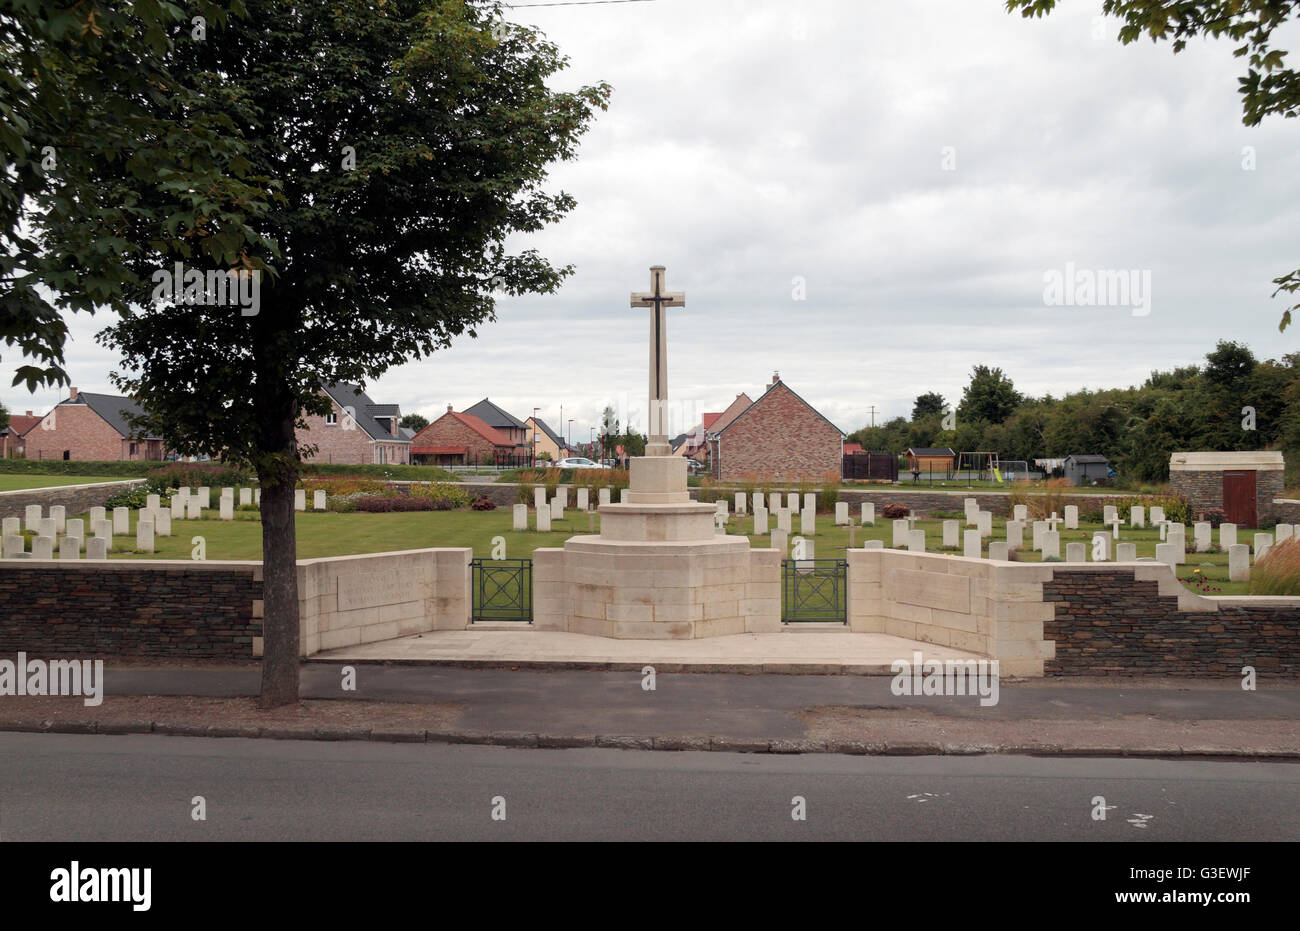 Cross of Sacrifice and headstones in the CWGC Fosse 7 Military Cemetery (Quality Street), Mazingarbe, Pas de Calais, France. Stock Photo